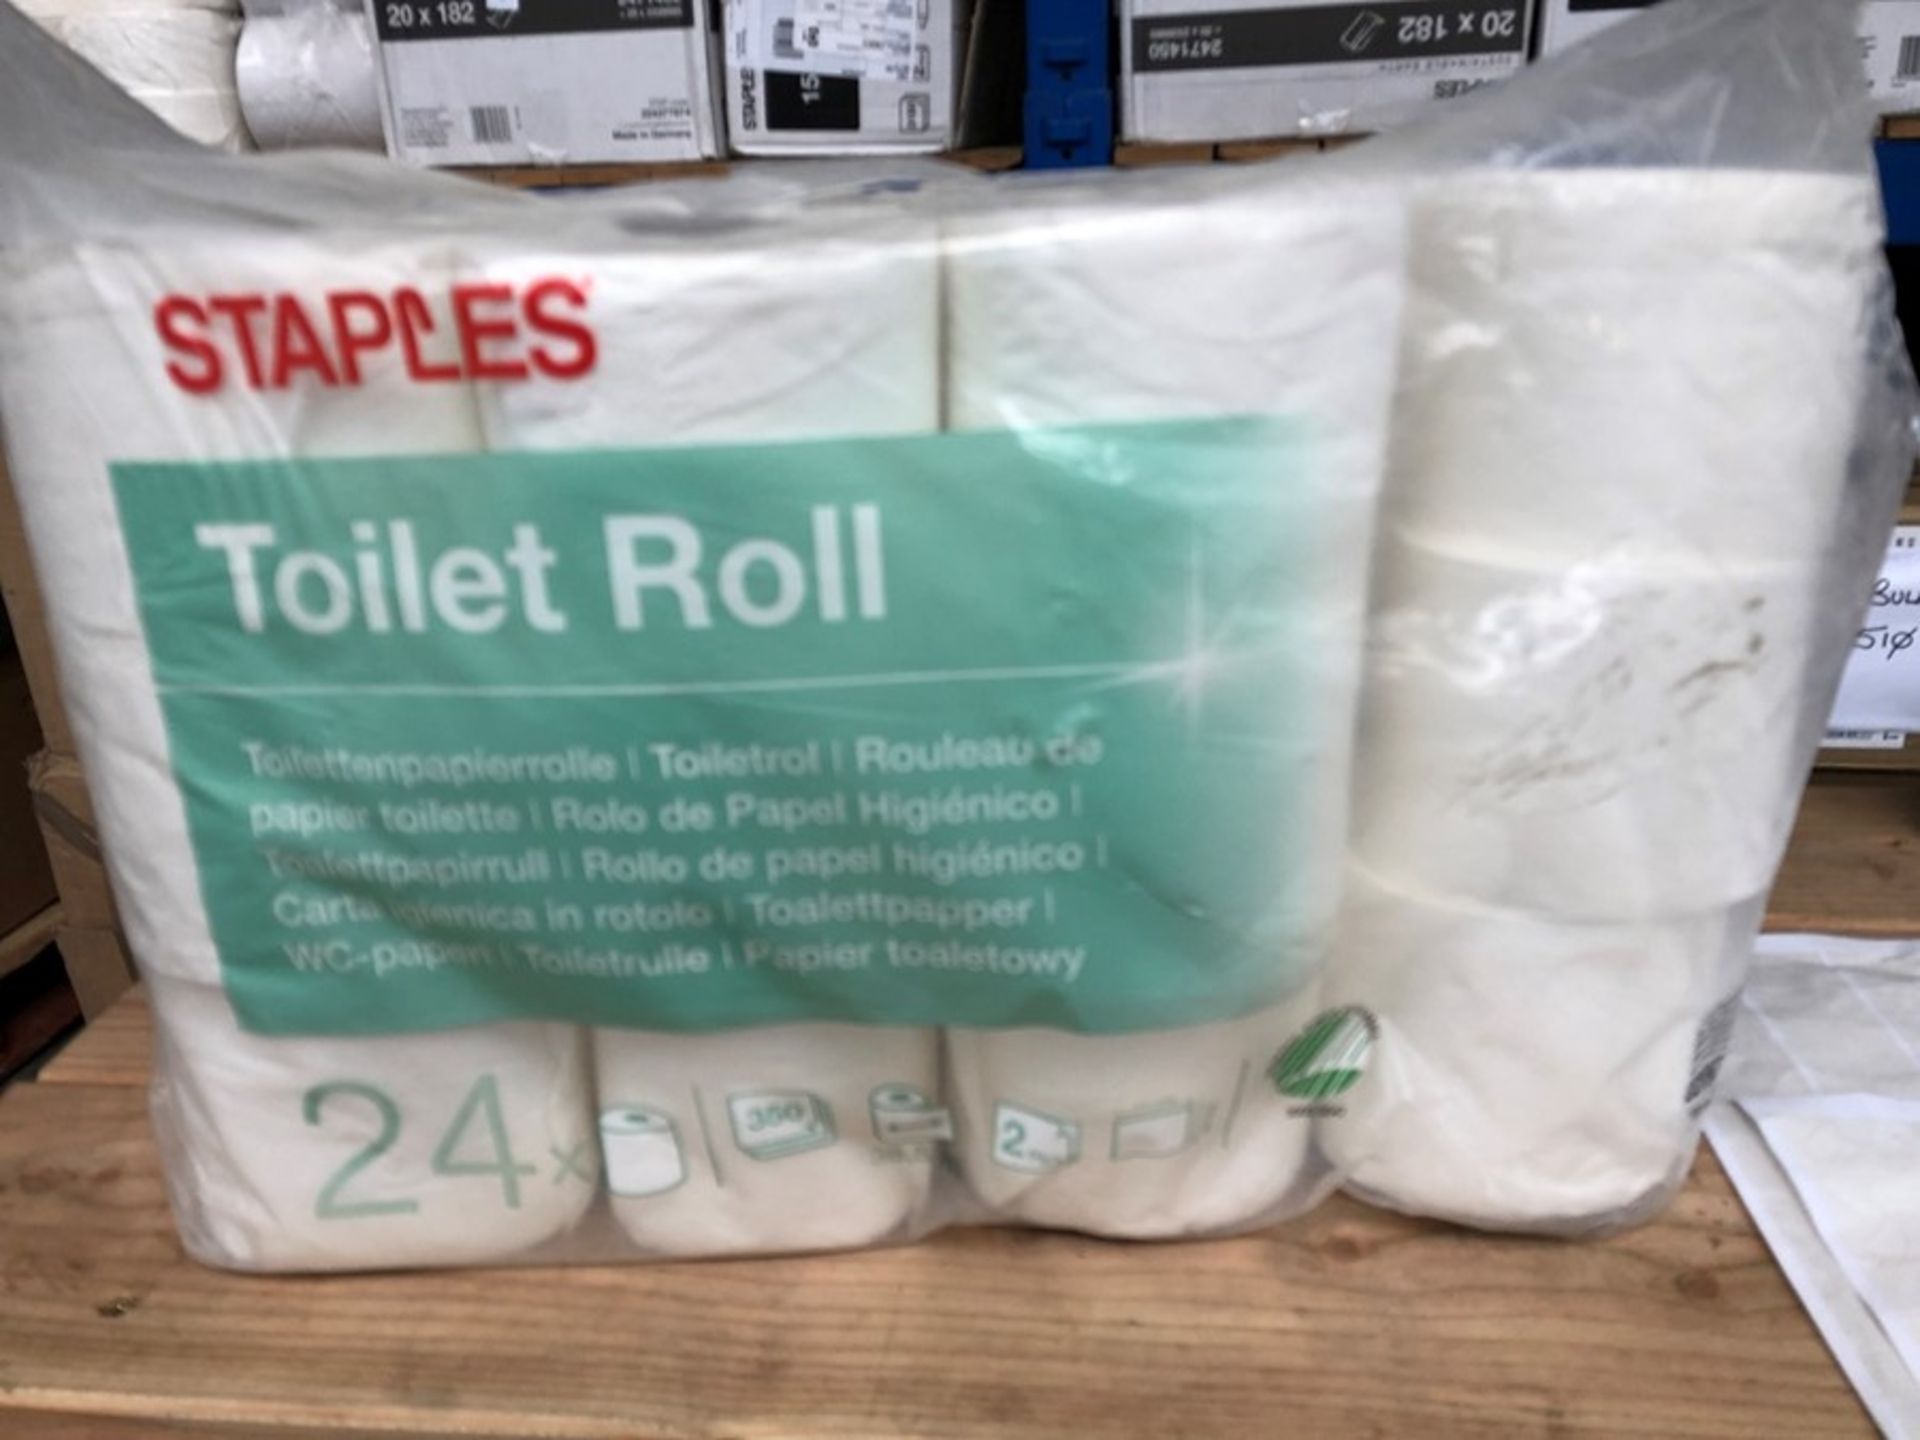 1 BAGGED SET OF STAPLES TOILET ROLLS